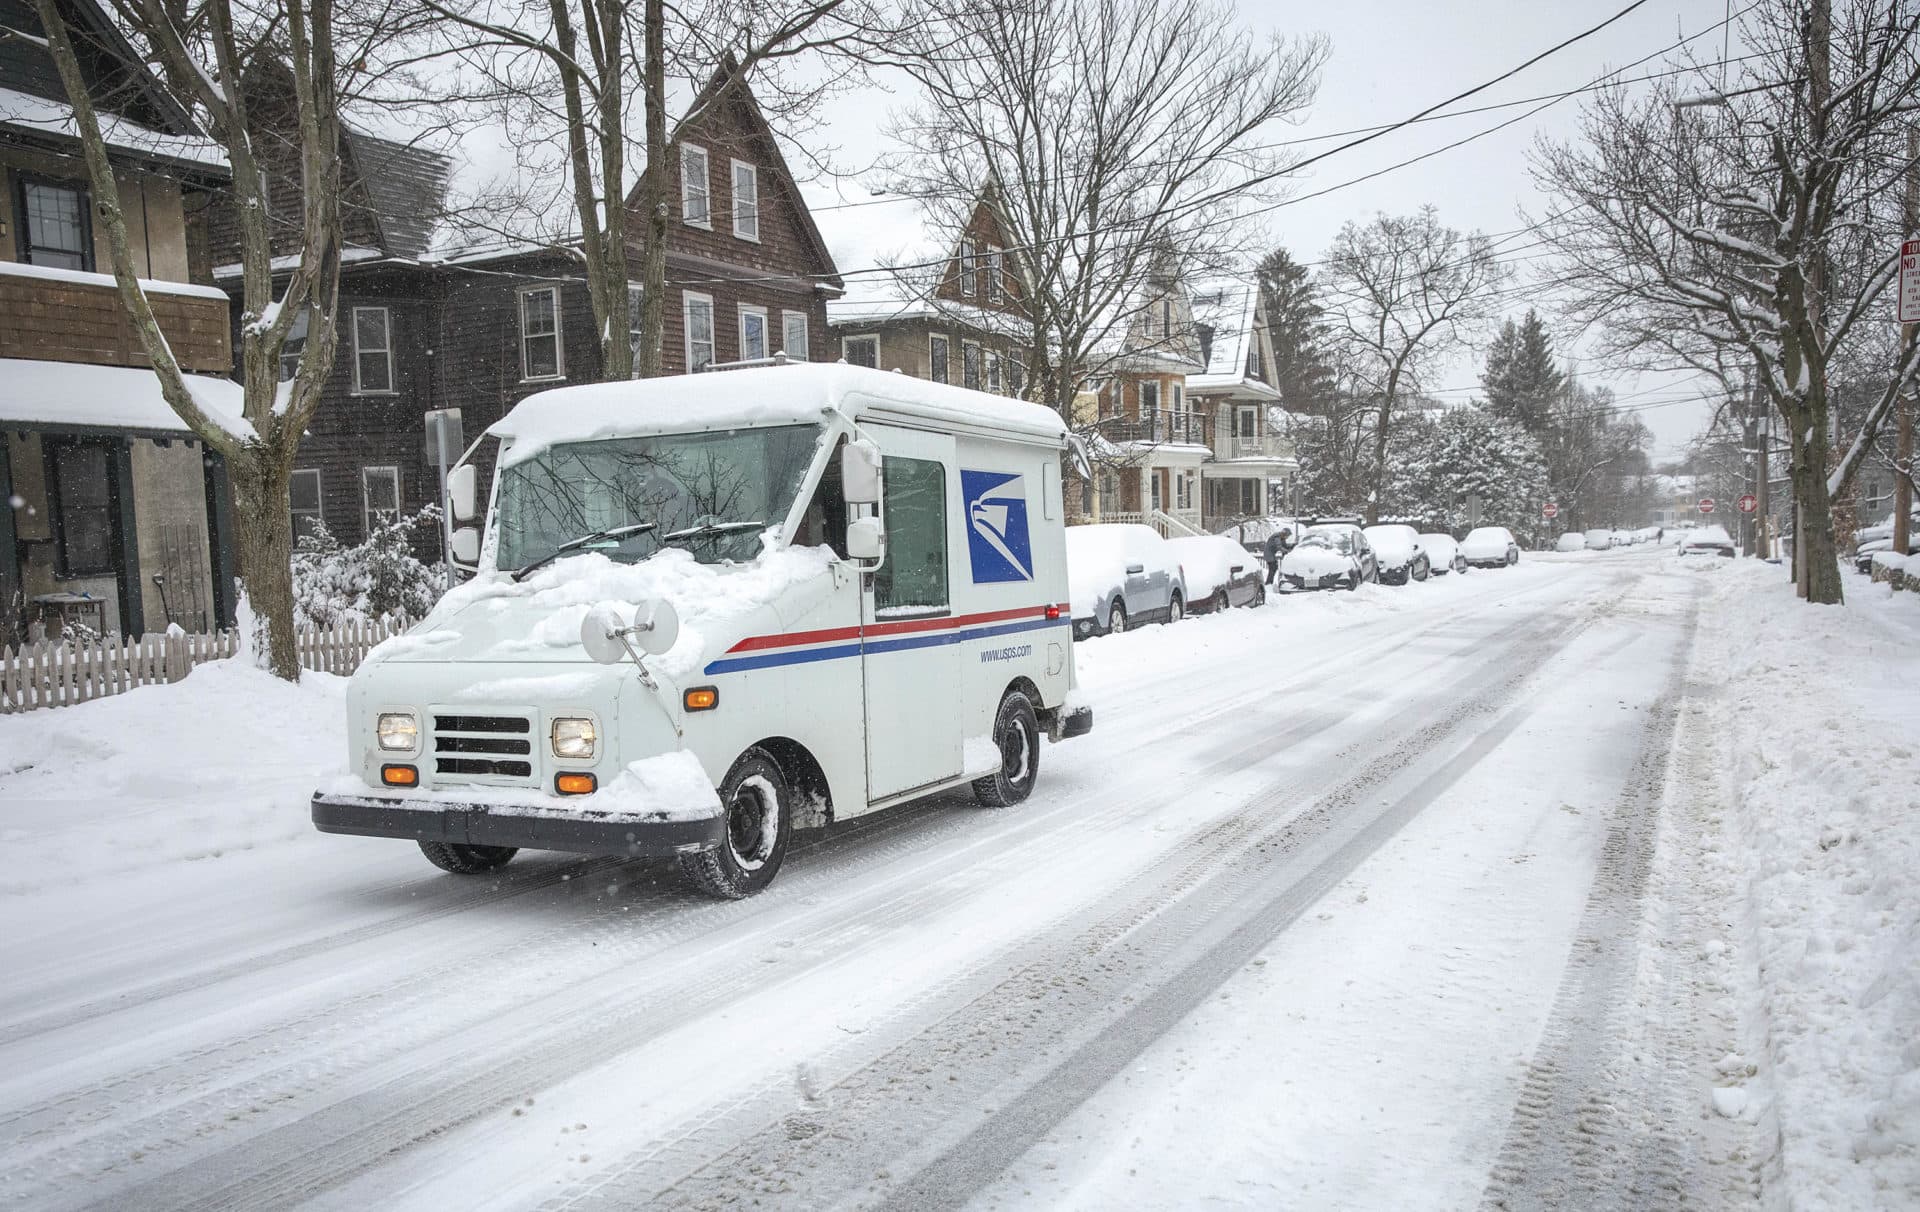 Undeterred by the snow, a Post Office vehicle makes its deliveries in Cambridge. (Robin Lubbock/WBUR)